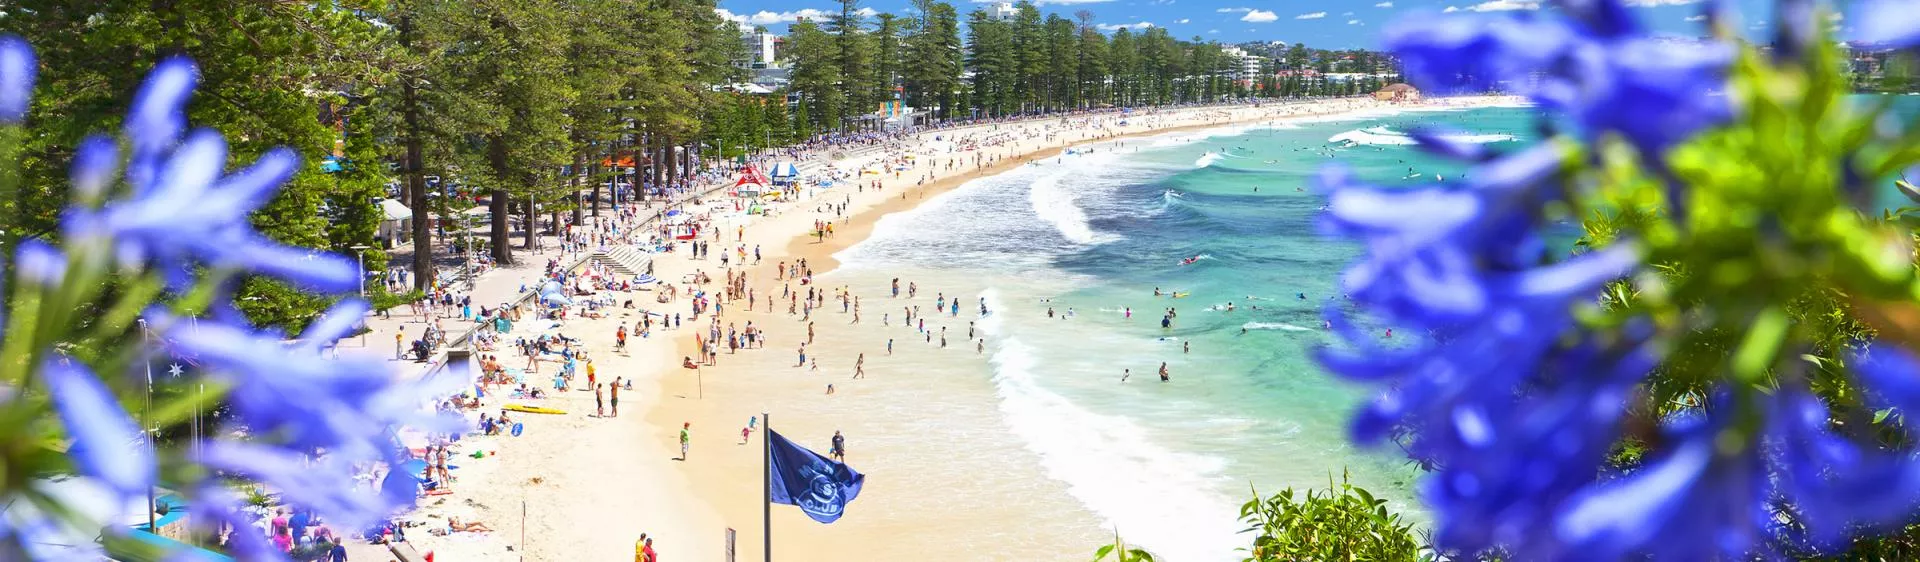 Manly Beach in Australia, Australia and Oceania | Surfing,Beaches - Rated 4